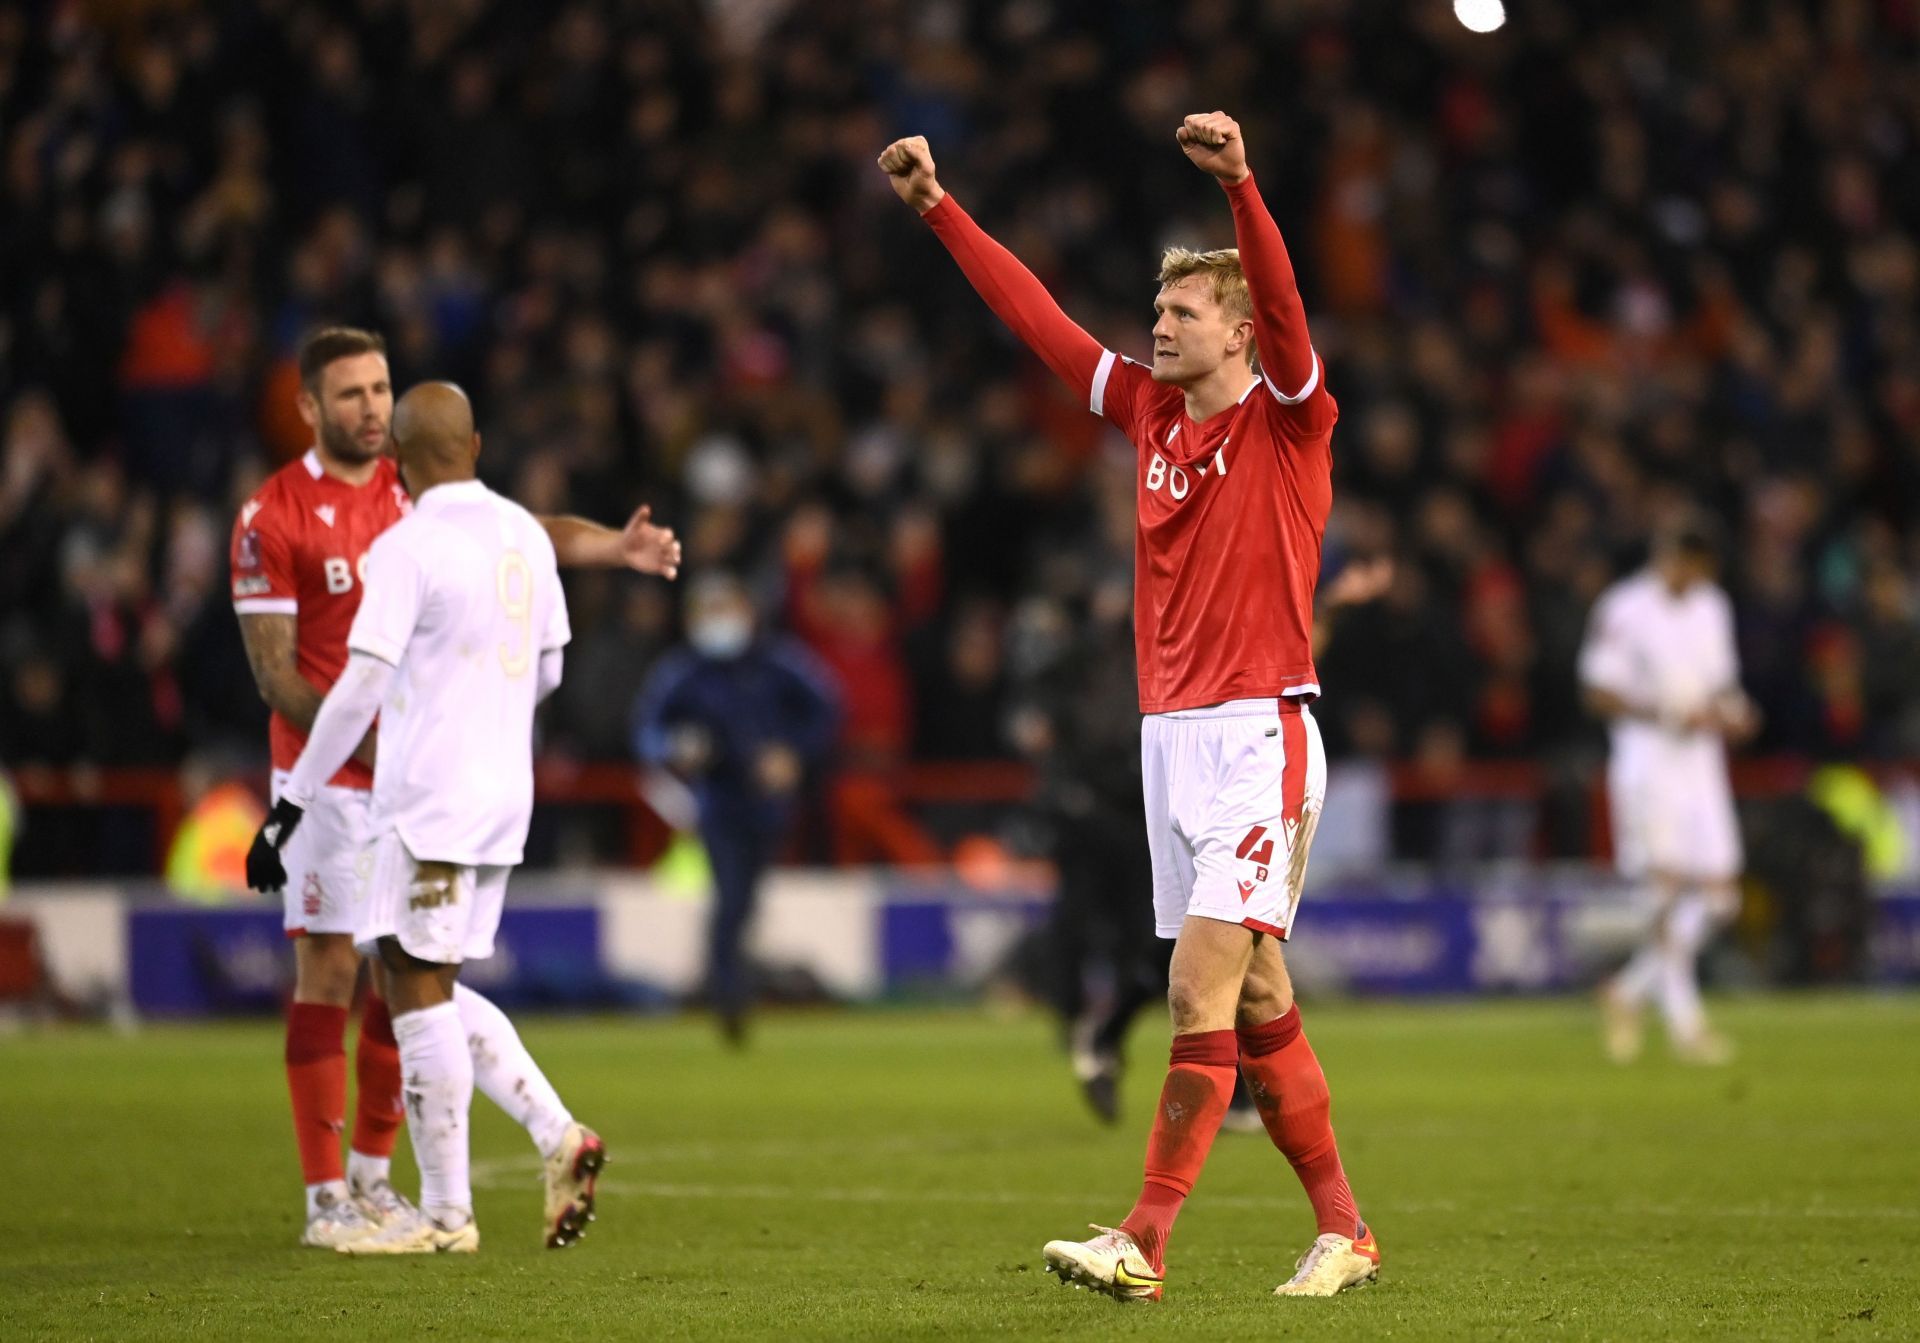 Nottingham Forest will host Barnsley on Tuesday - Championship